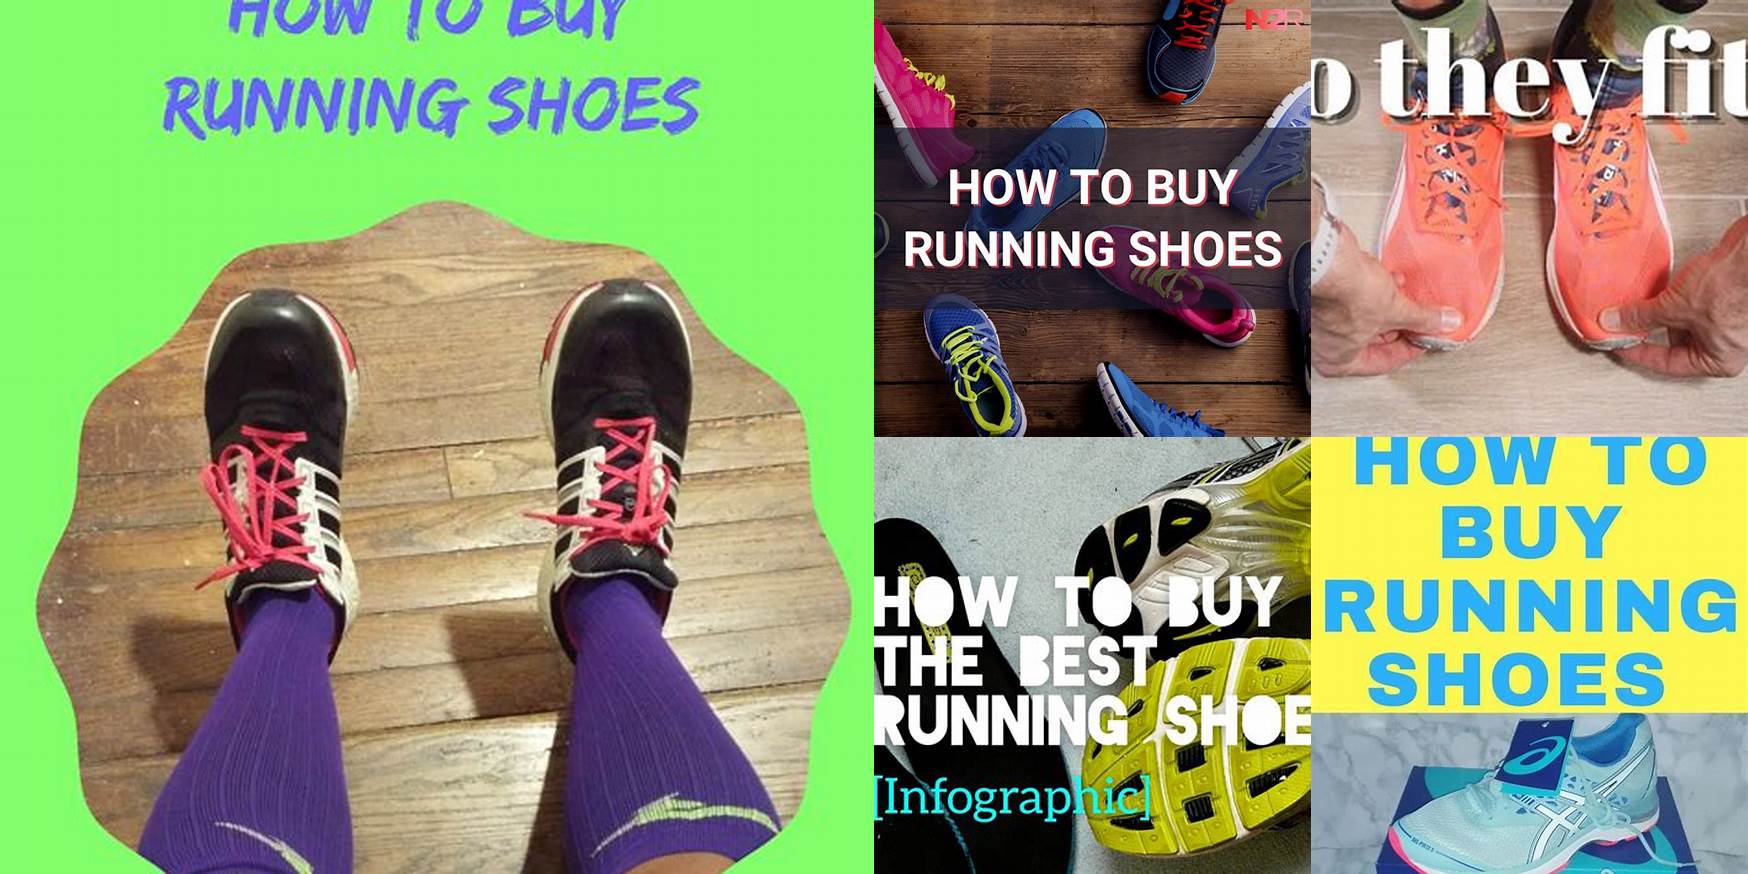 How To Buy Running Shoes Reddit